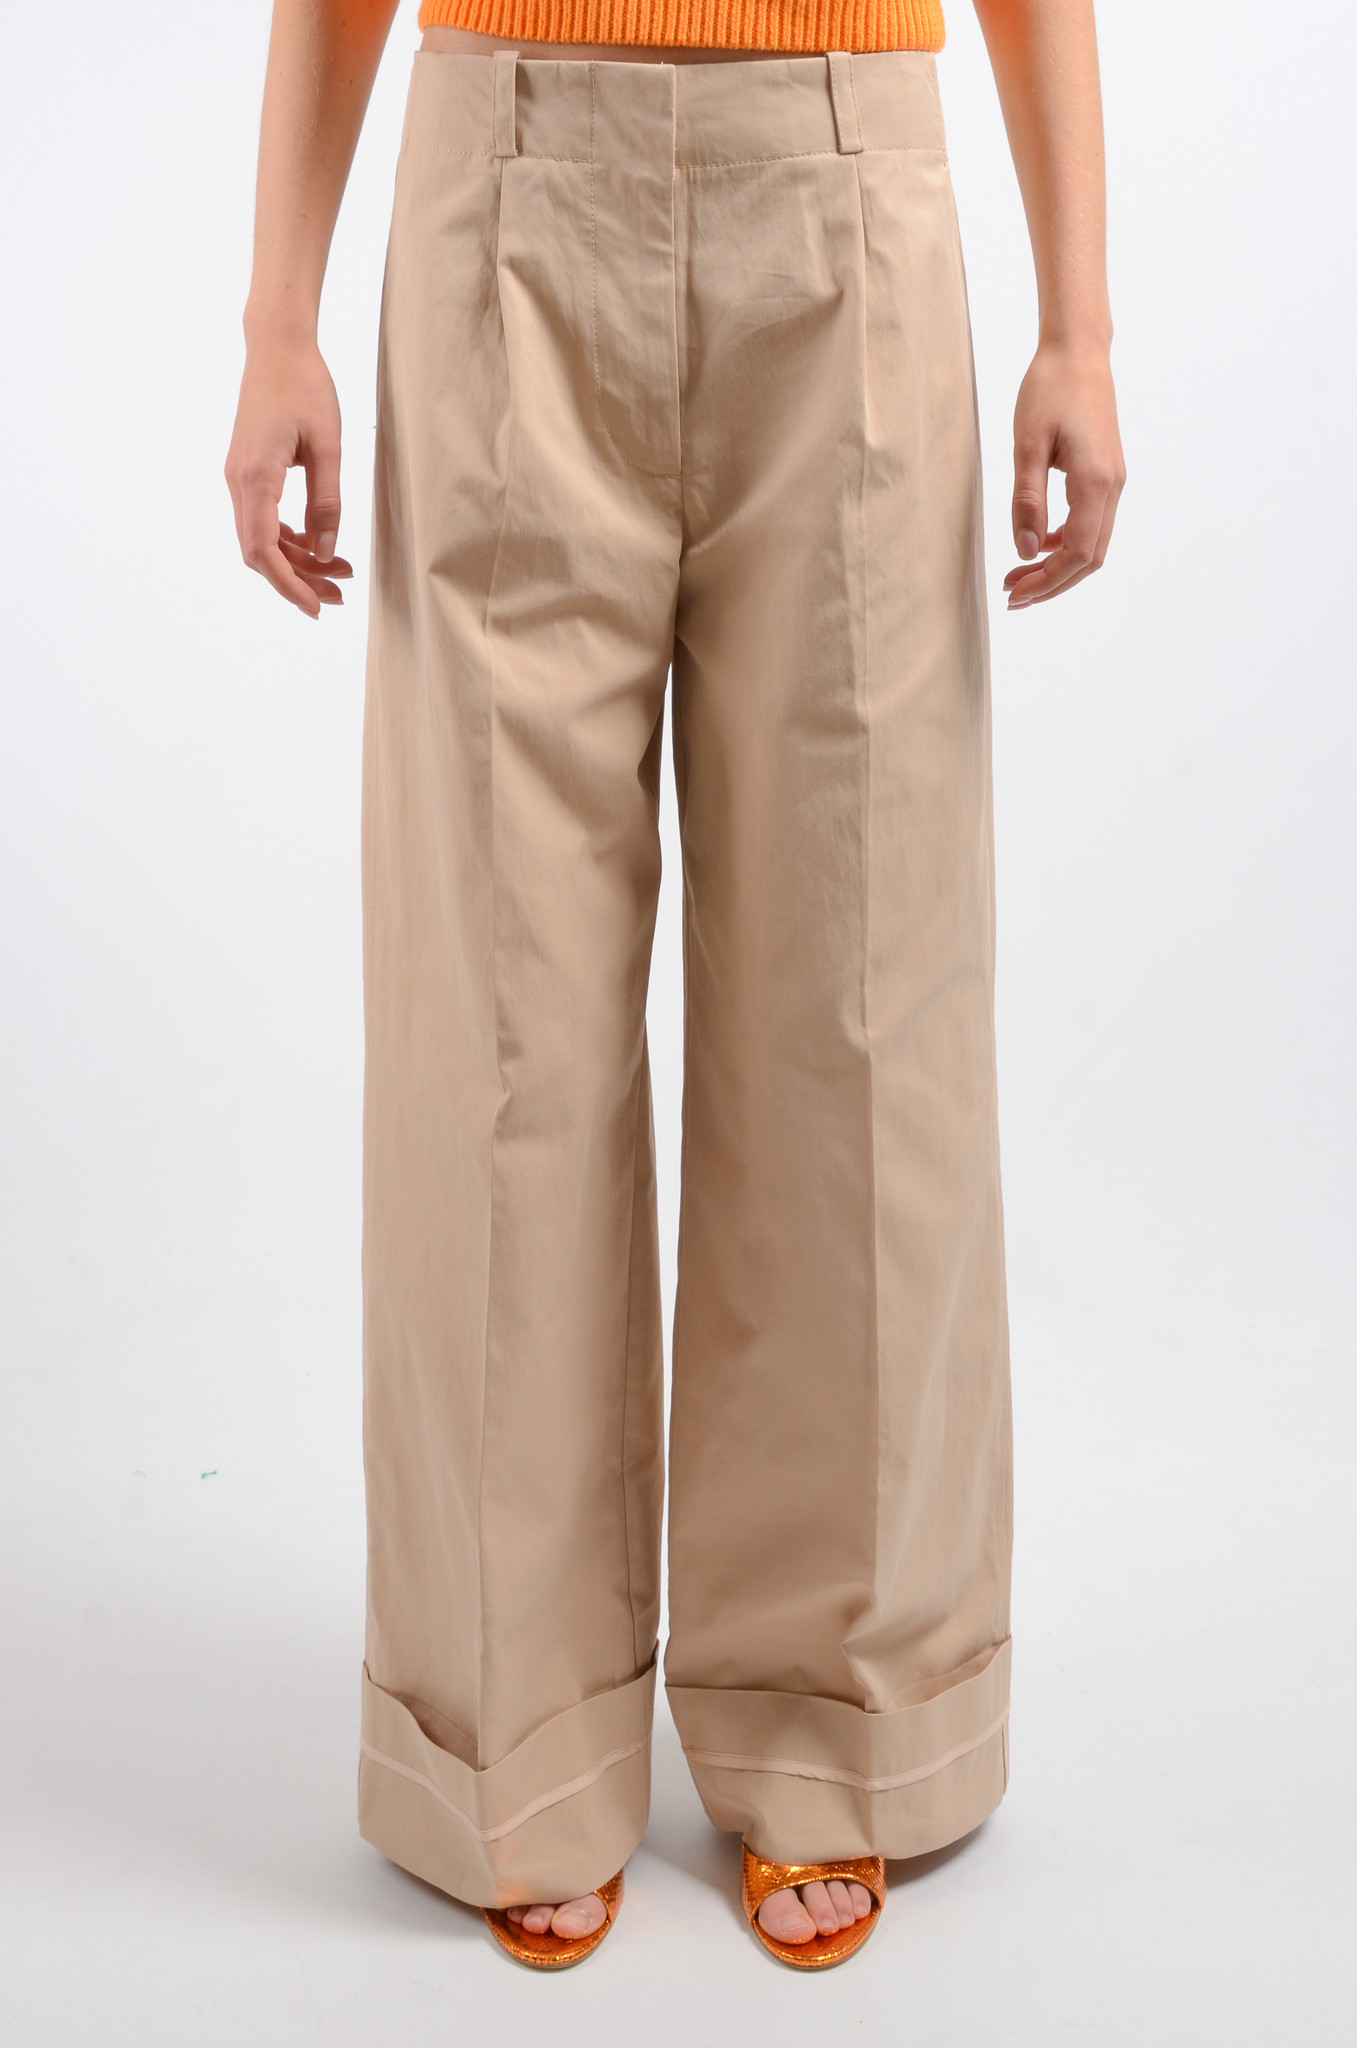 Naddie Trousers in Drizzle-2